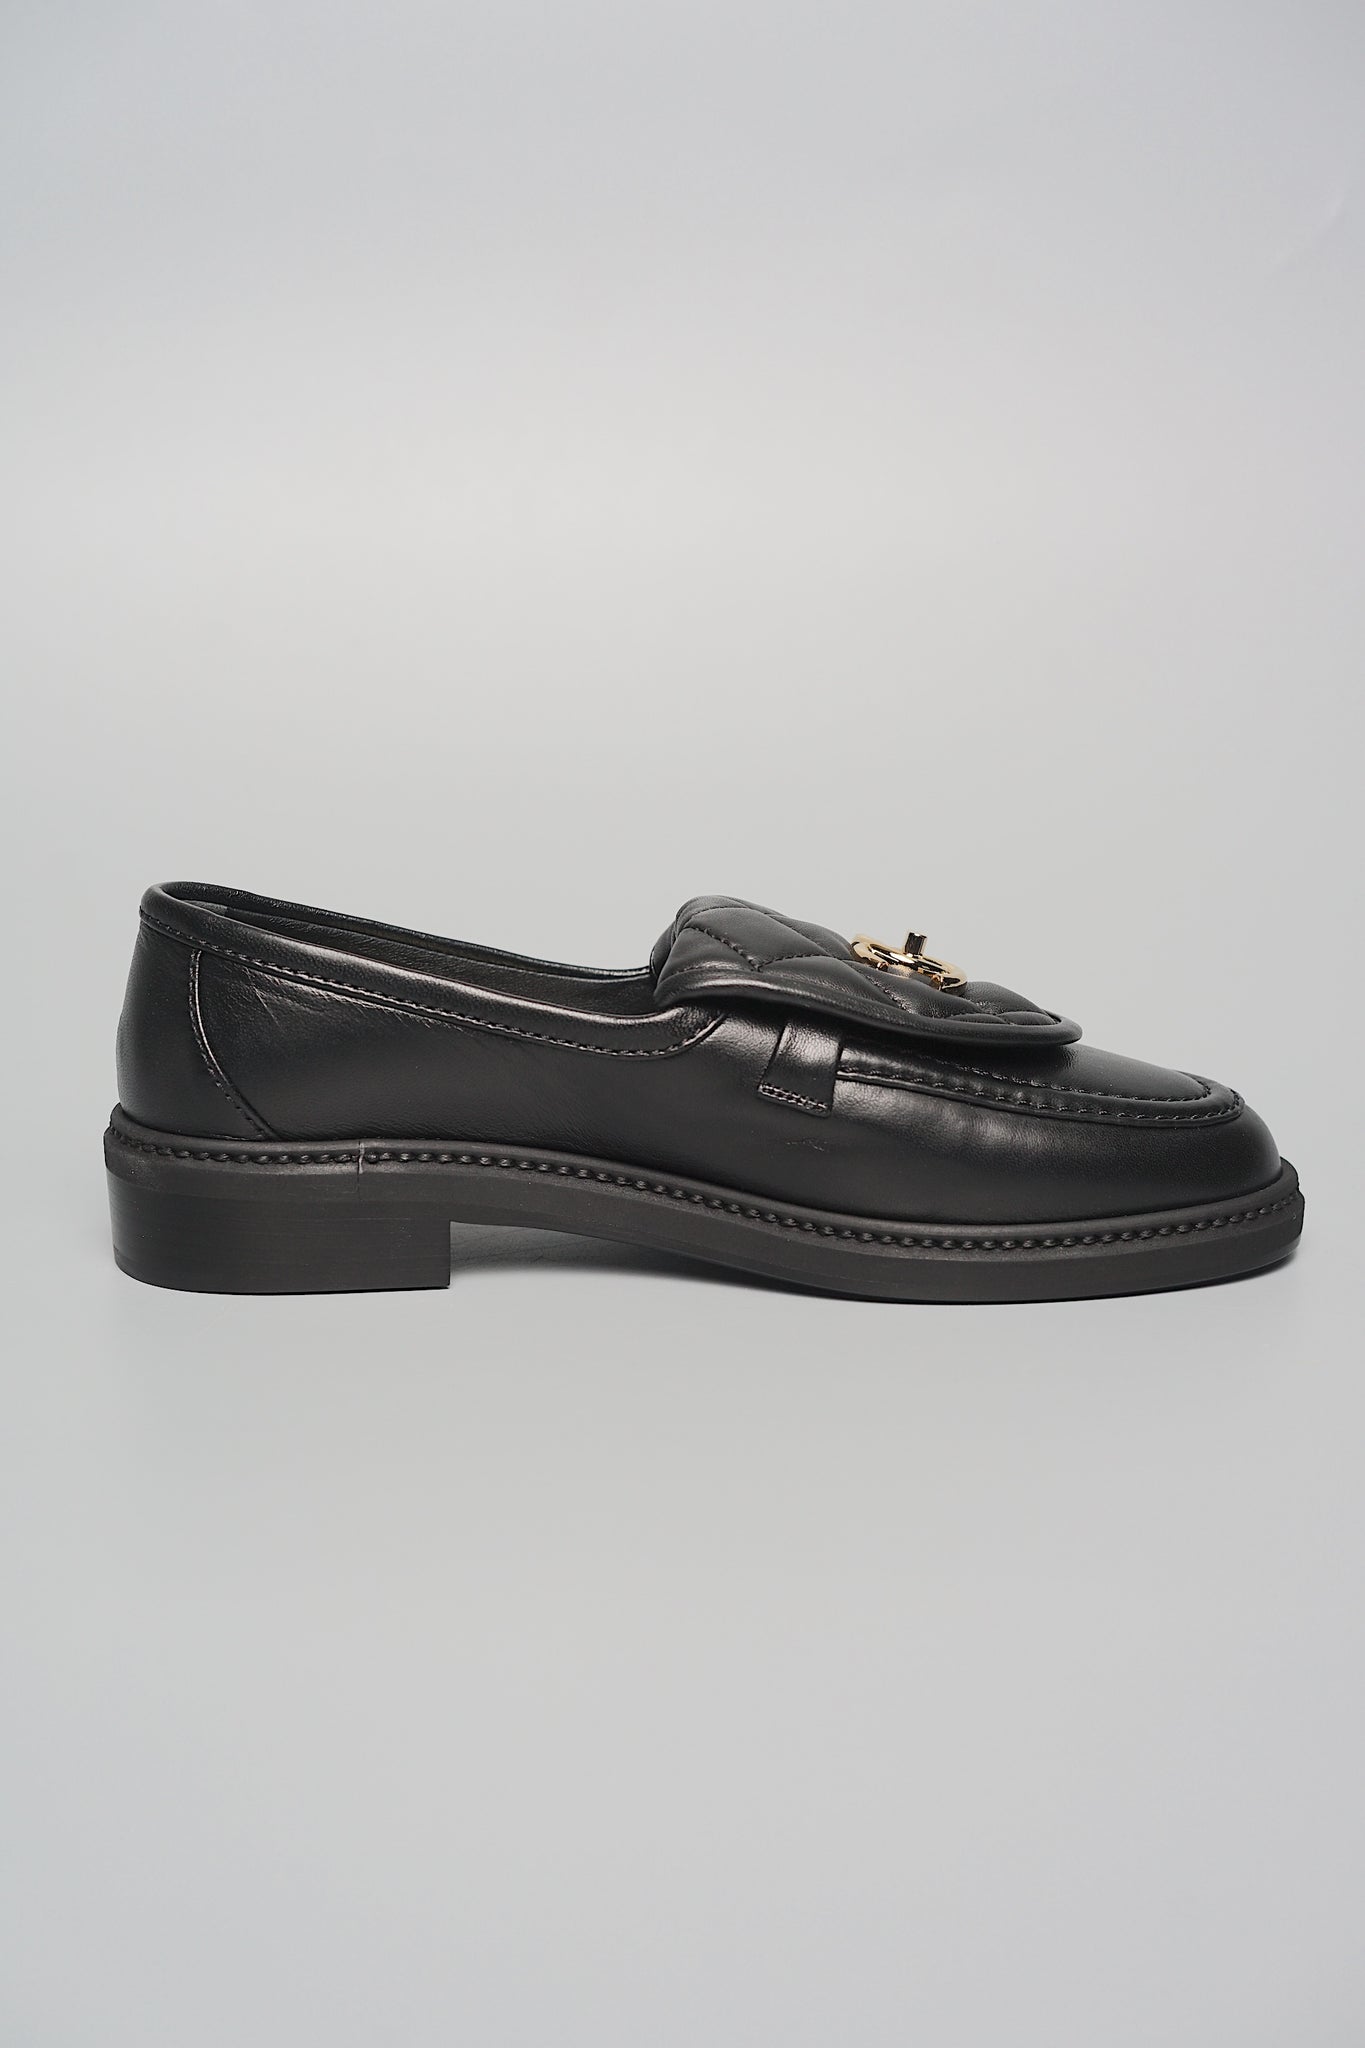 Chanel 24C Black Loafers in Size 37 (Brand New)